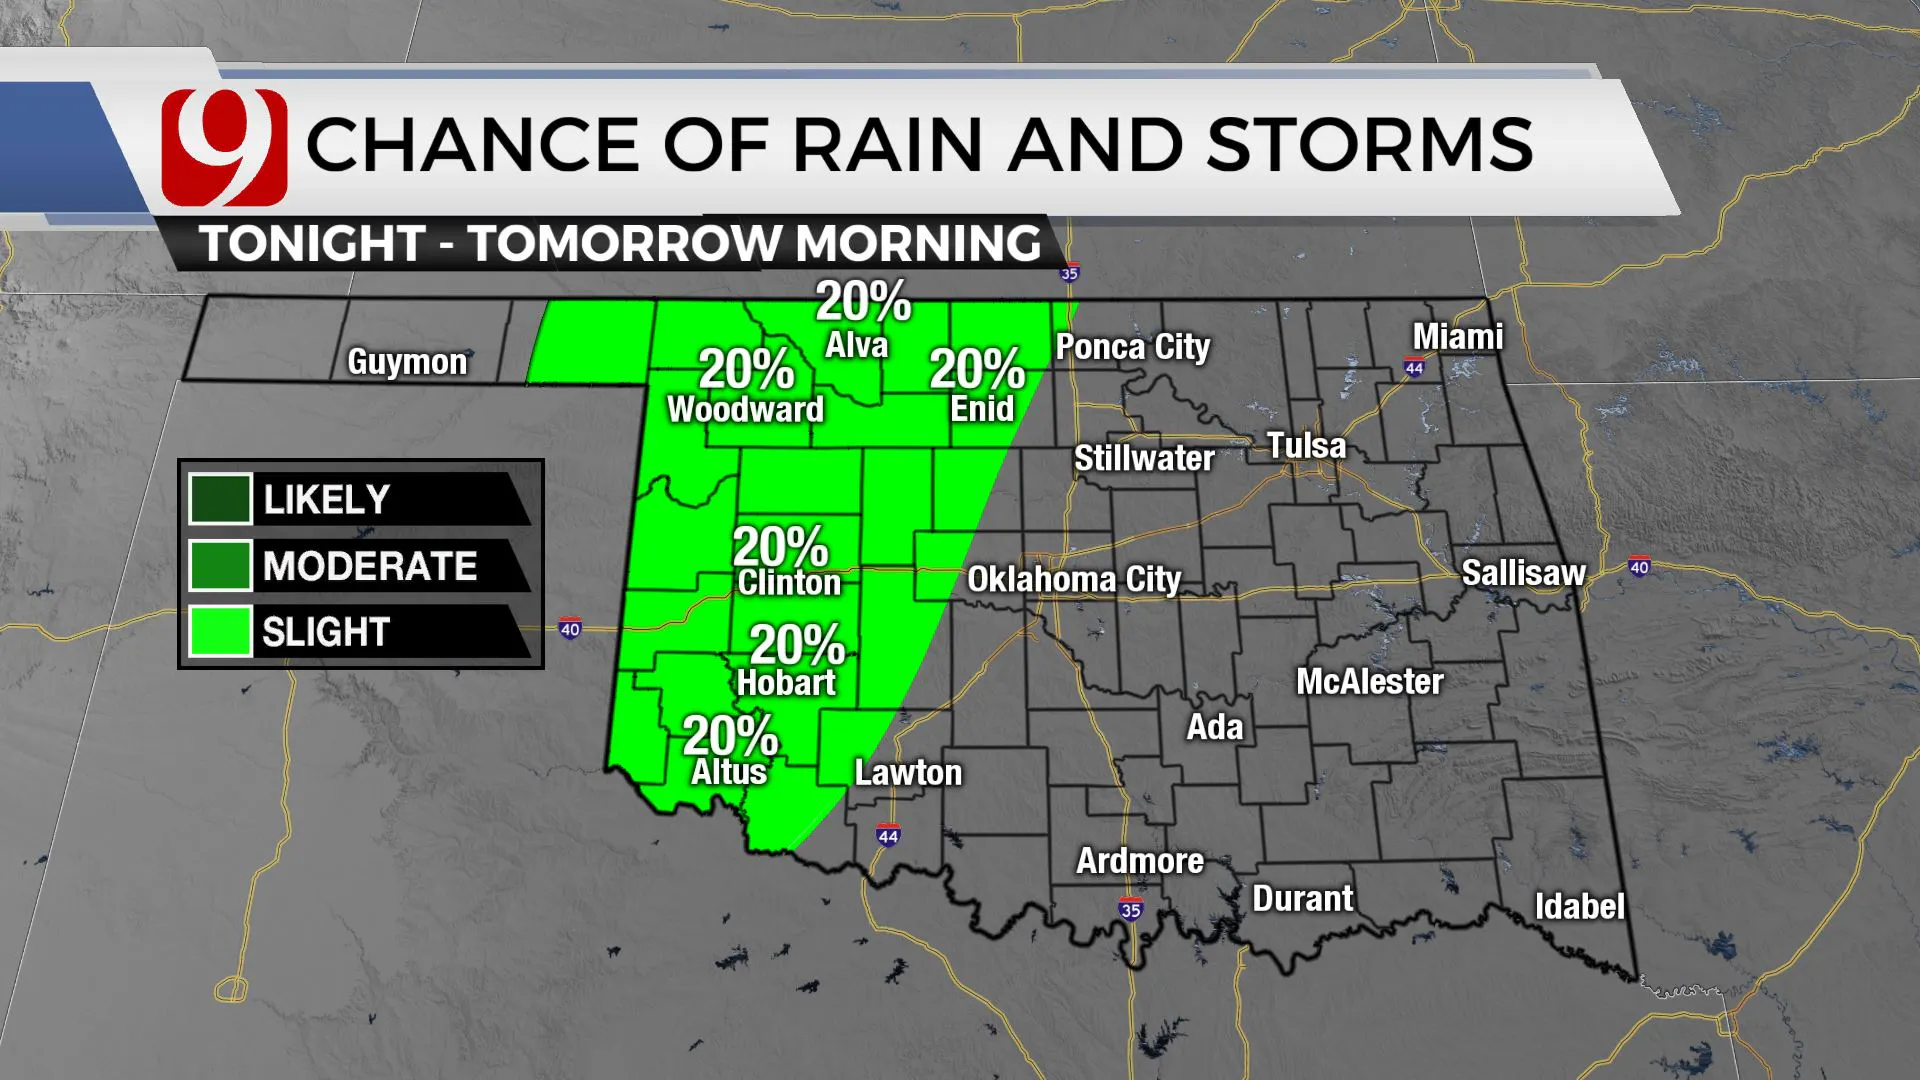 Chances of rain and storms tonight and tomorrow.